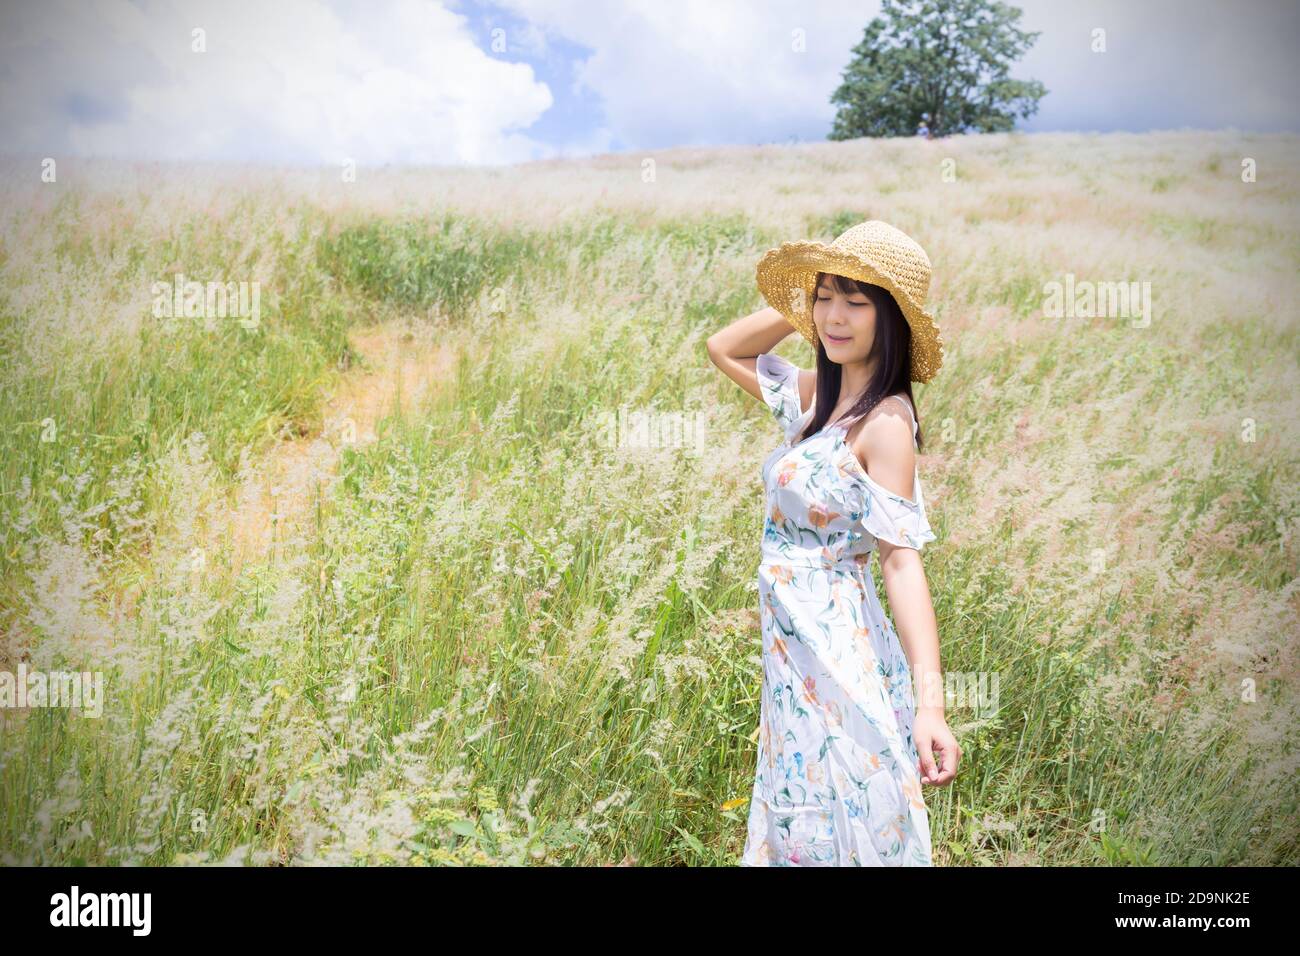 The girl wearing a hat, wearing a white dress, standing in the middle of the grass with beautiful white flowers with a relaxed and happy mood. Gray fr Stock Photo